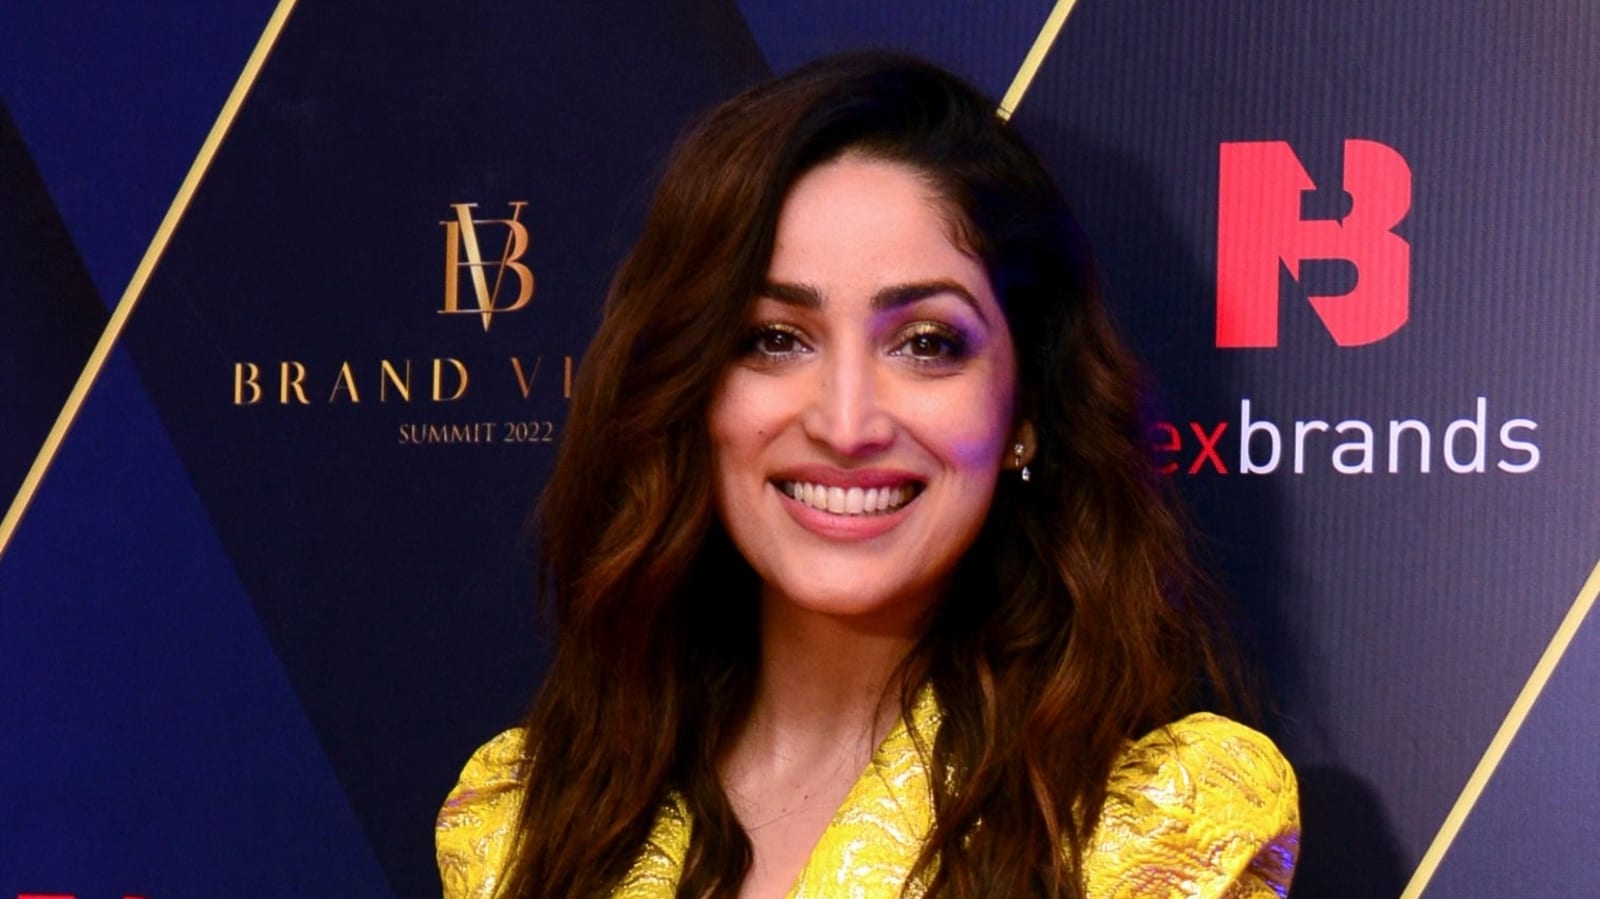 Yami Gautam says her Instagram account is ‘probably hacked’: ‘Please be aware’